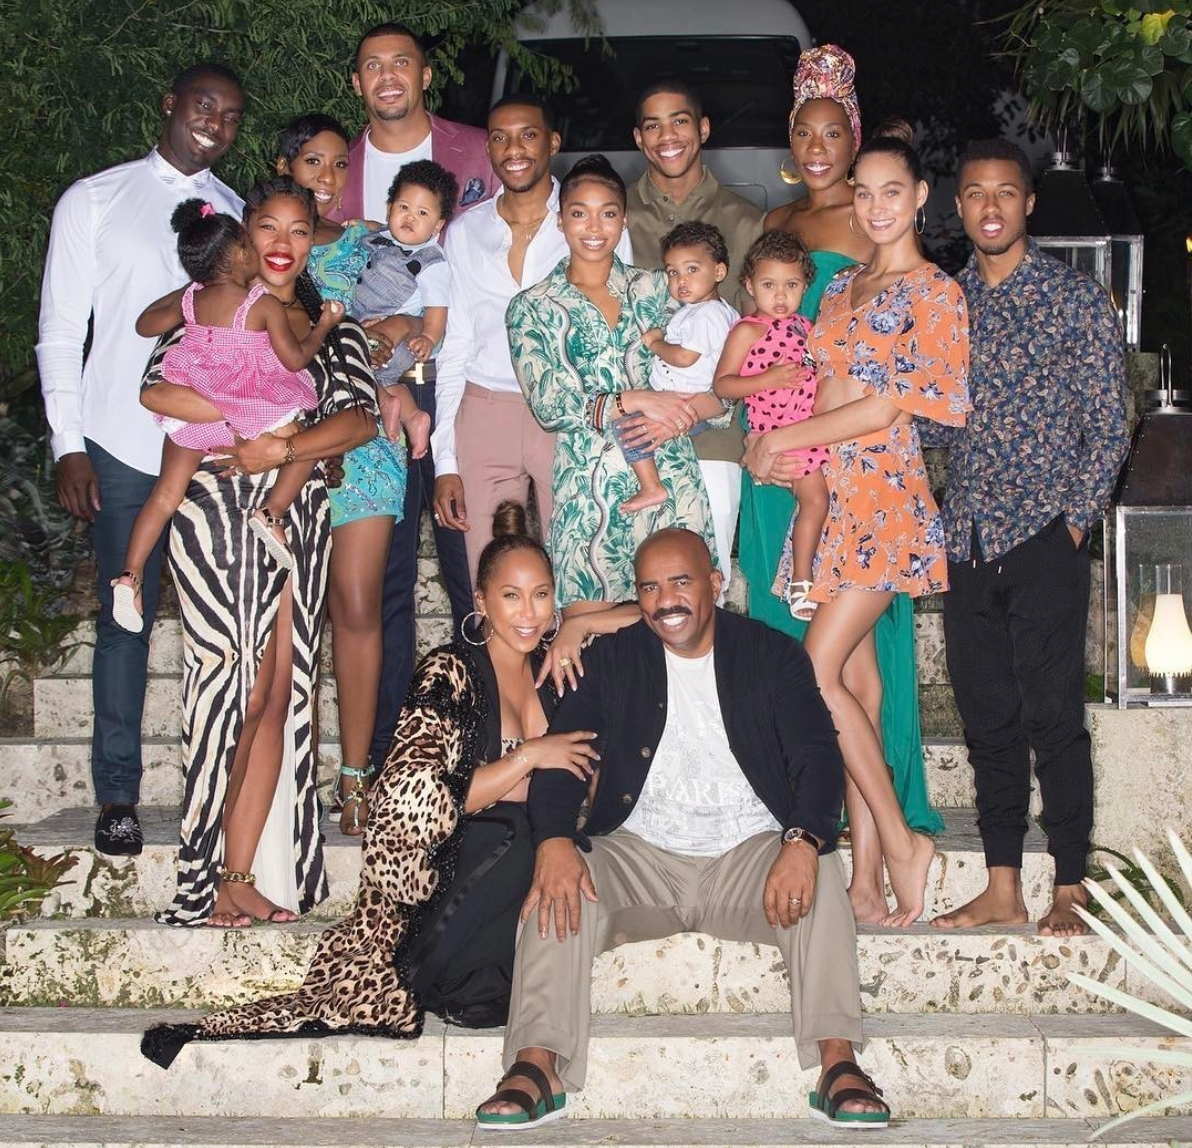 Steve And Marjorie Harvey Are Expecting Another Grandchild And The Family Is Over The Moon About It
